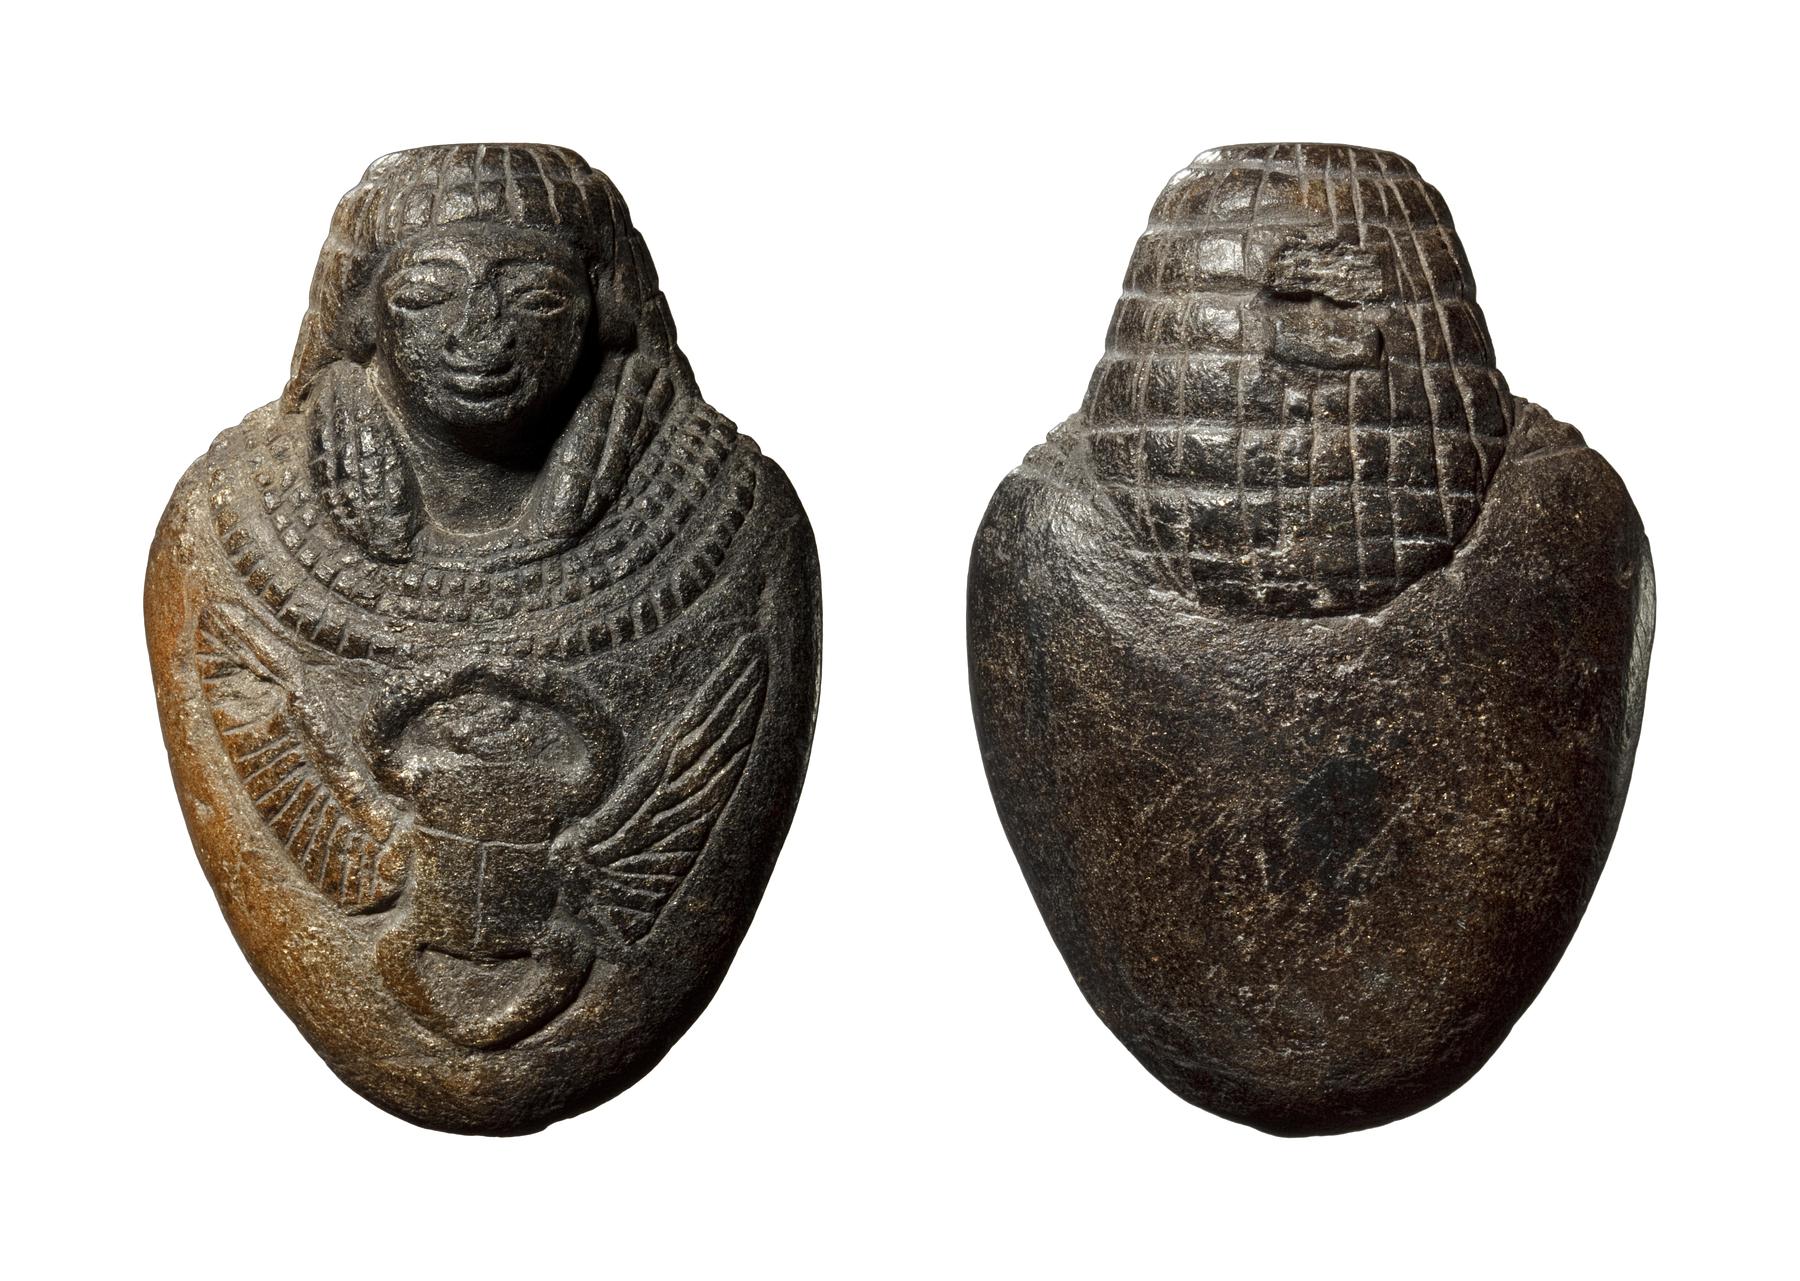 Heart amulet with a a scarab and a human head, H383